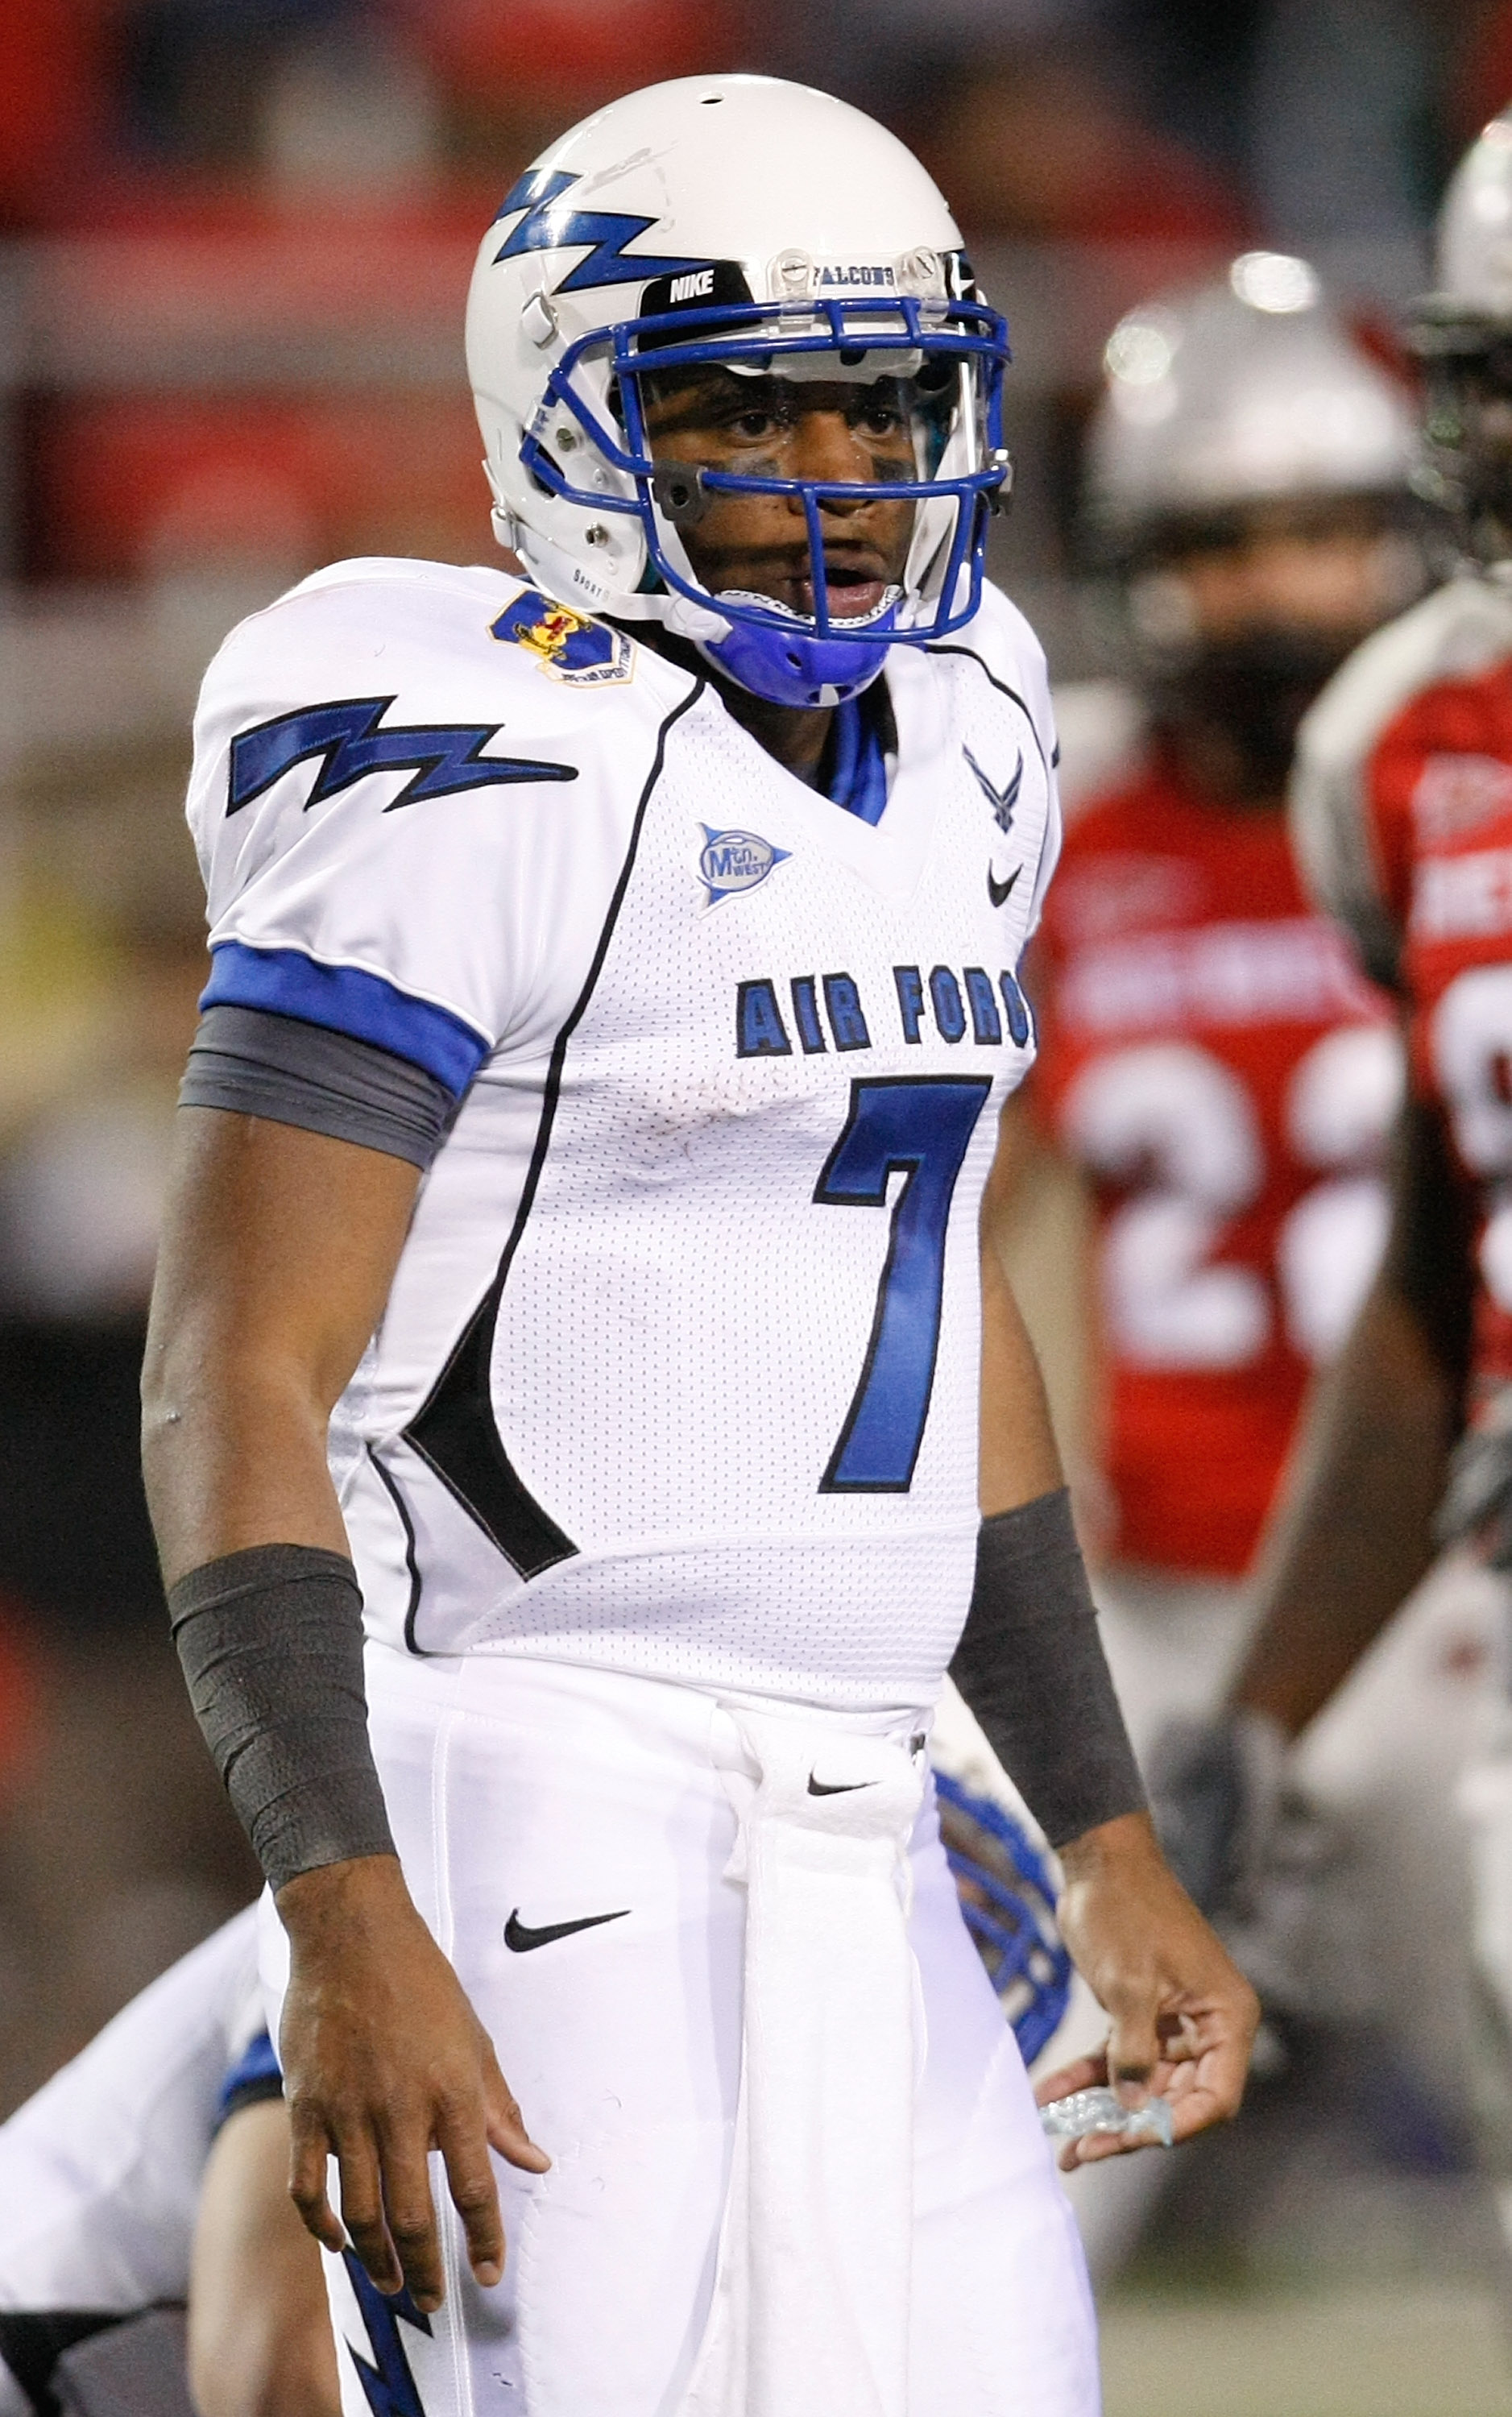 LAS VEGAS - NOVEMBER 18:  Quarterback Tim Jefferson Jr. #7 of the Air Force Falcons gets instructions from his sideline during a game against the UNLV Rebels at Sam Boyd Stadium November 18, 2010 in Las Vegas, Nevada. Air Force won 35-20.  (Photo by Ethan